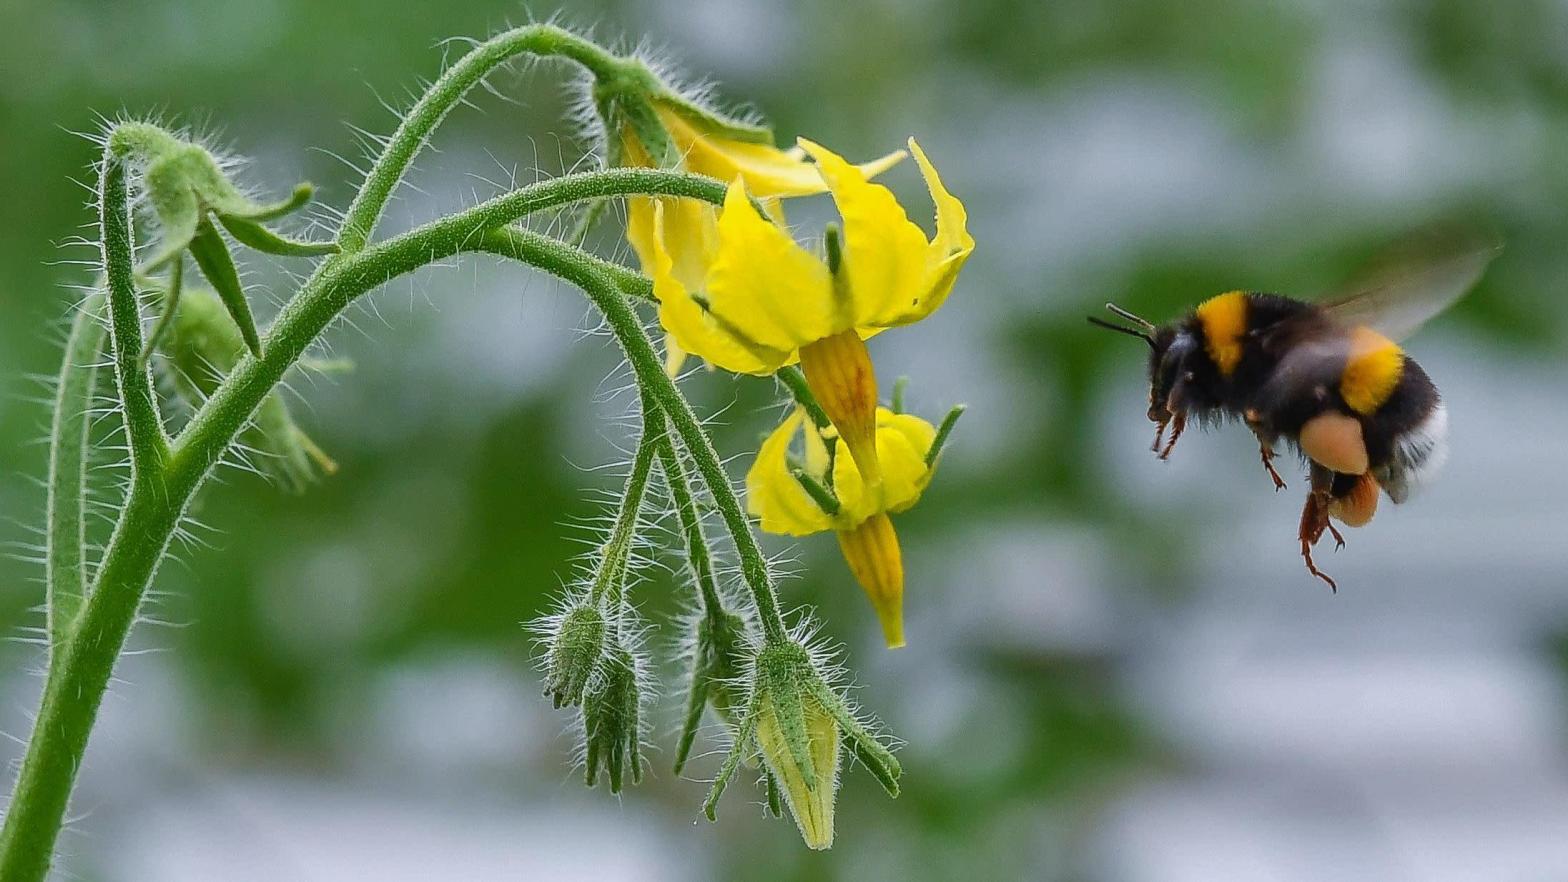 This tomato plant needs this bee!  (Photo: Patrick Pleul, Getty Images)